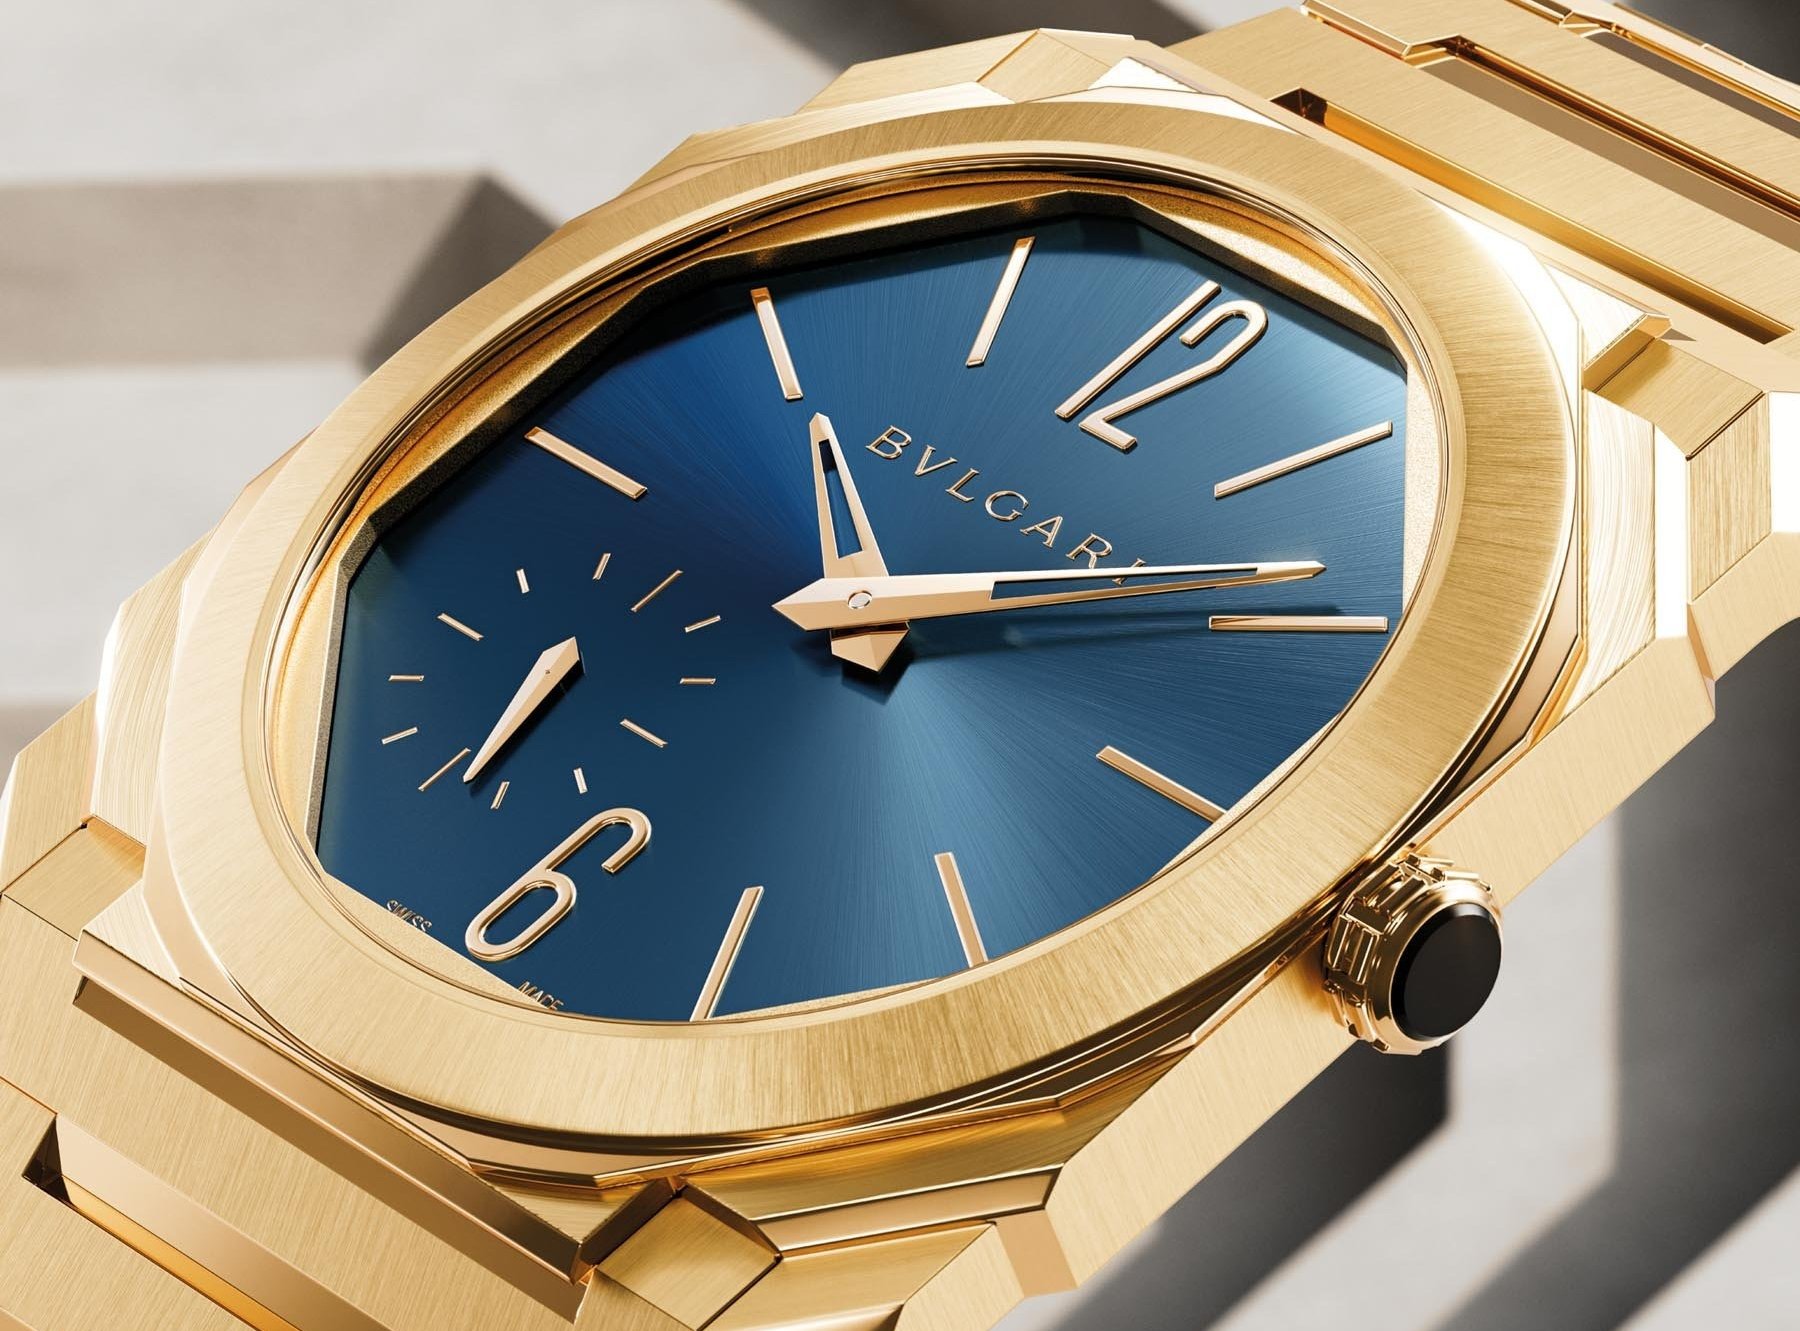 Bvlgari Launches Two Octo Finissimo Models At LVMH Watch Week ? One In Yellow Gold, The Other In 904L Steel